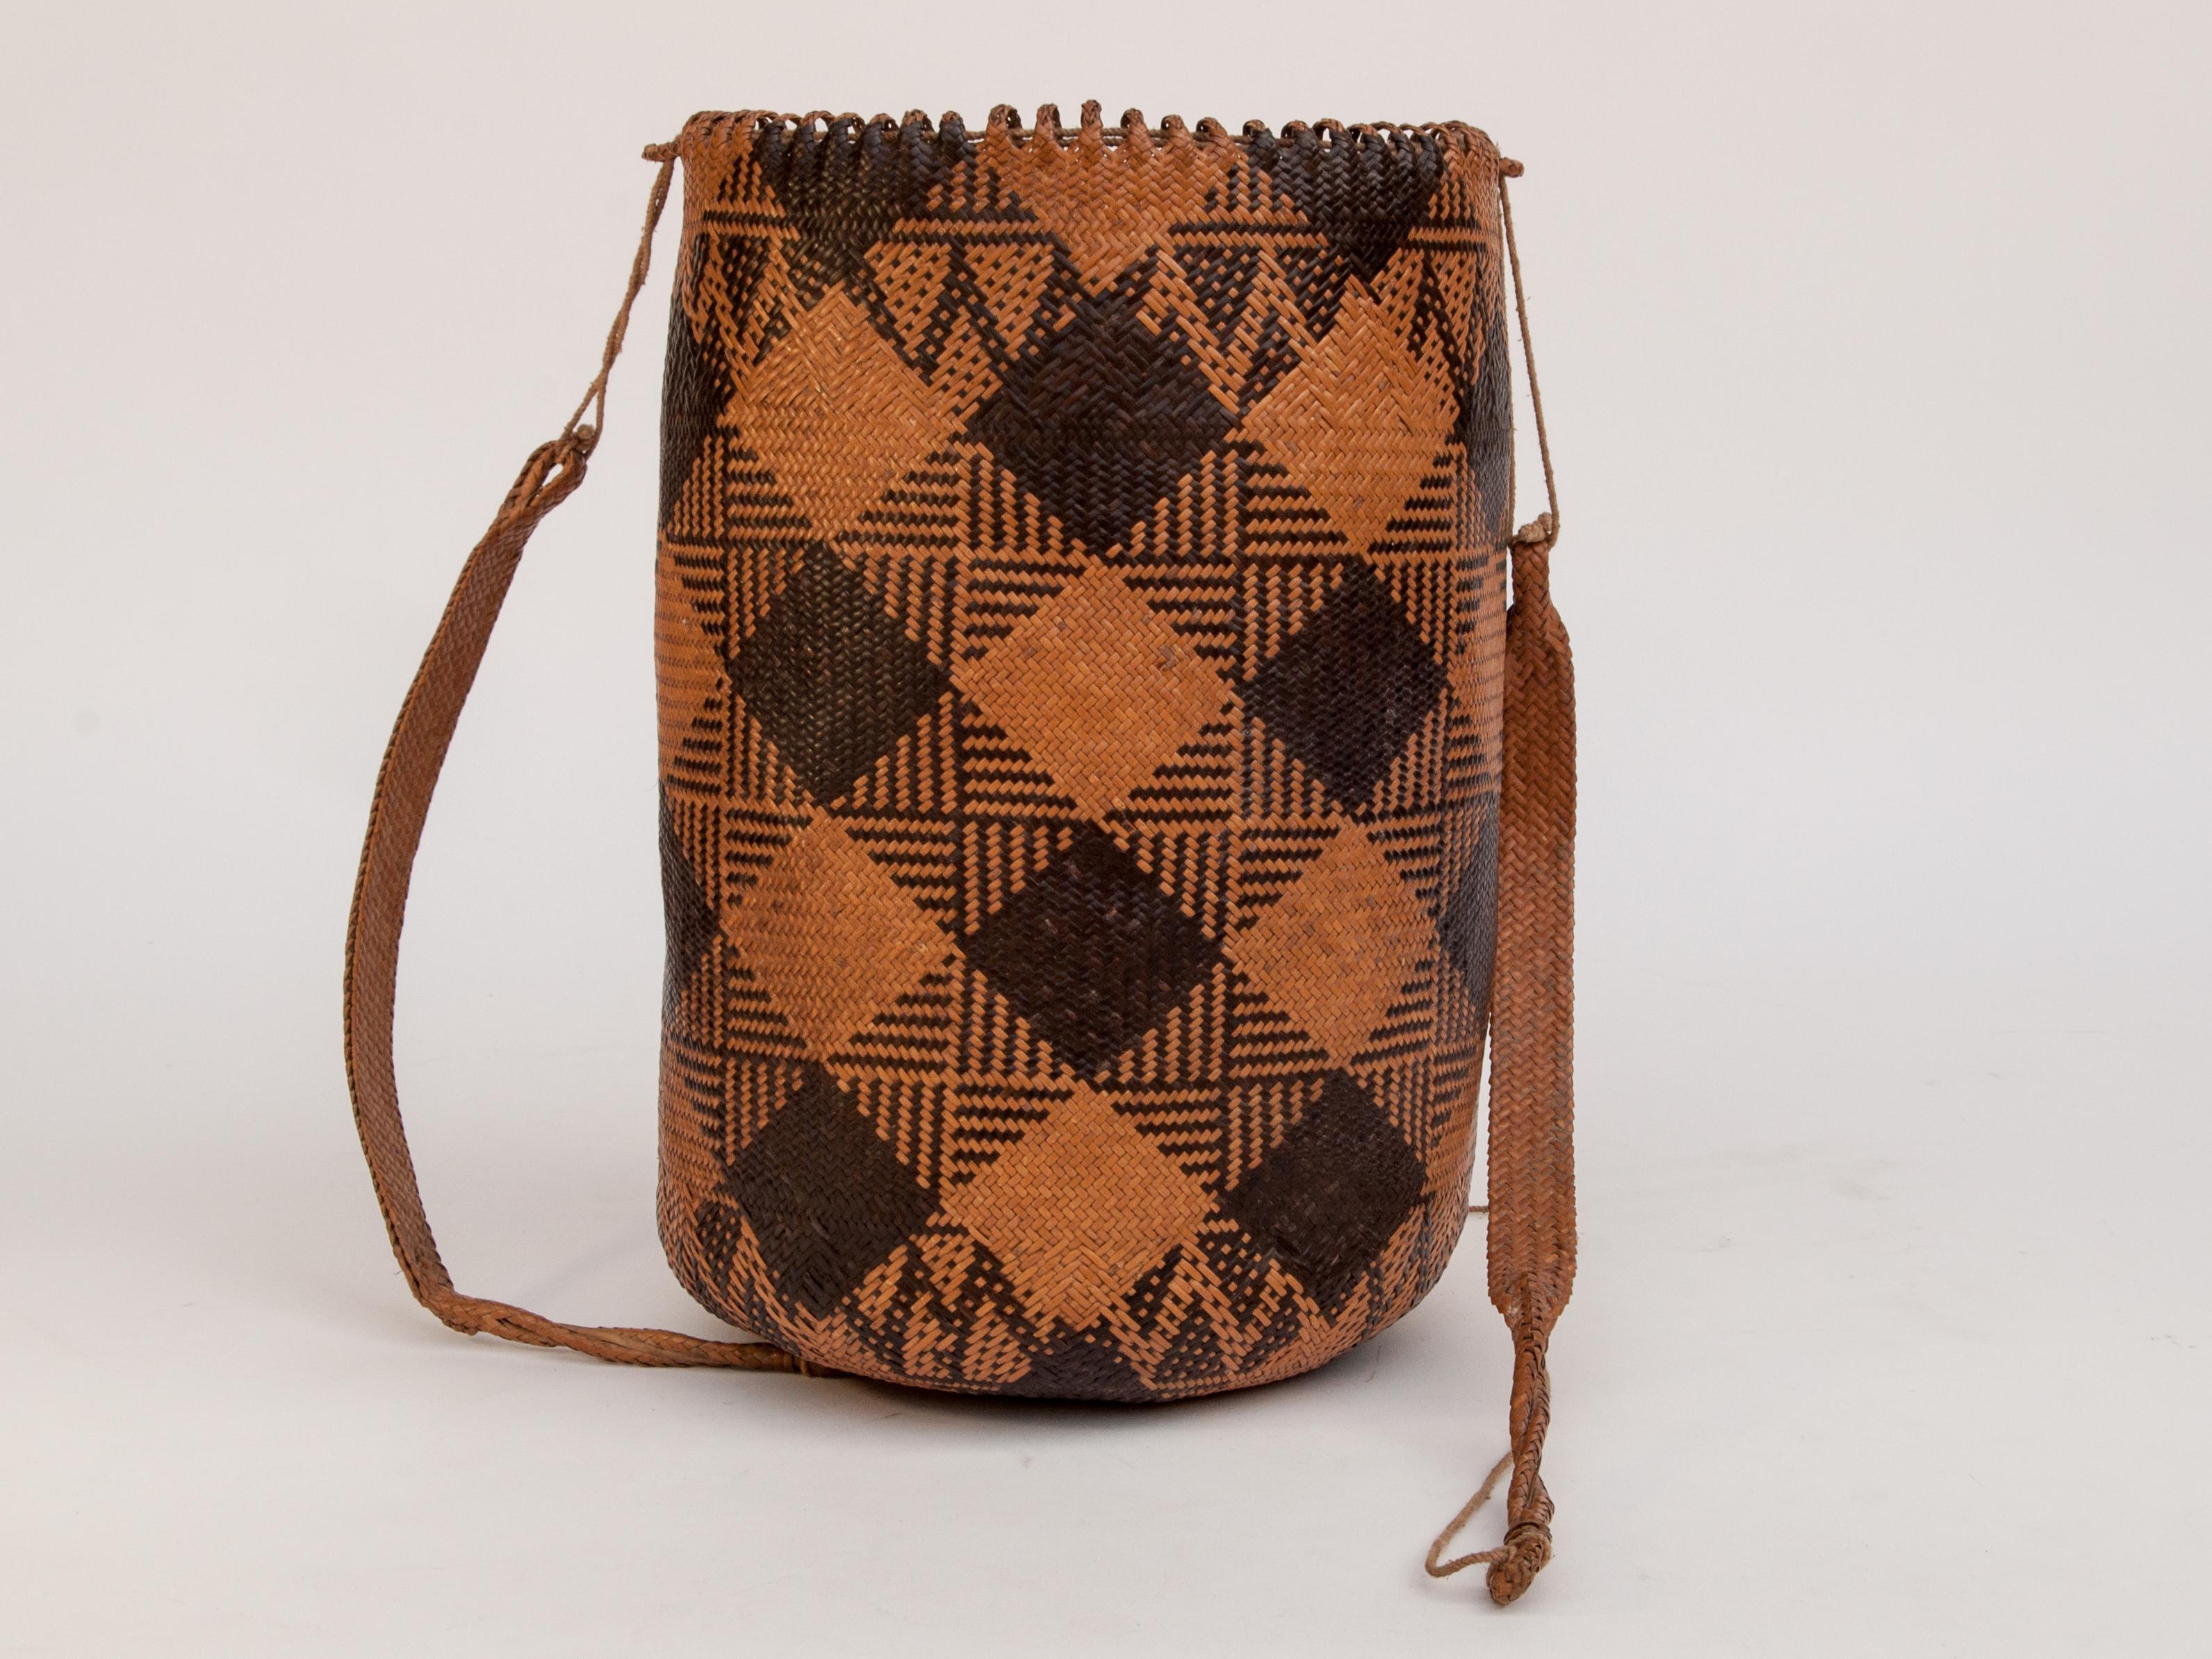 Rattan drawstring shoulder bag basket. Dayak of Borneo, late 20th century.
This thoroughly utilitarian shoulder basket comes from the Dayak of Borneo. Very cleanly woven of rattan with a geometric design, it is pliable and extremely durable. The